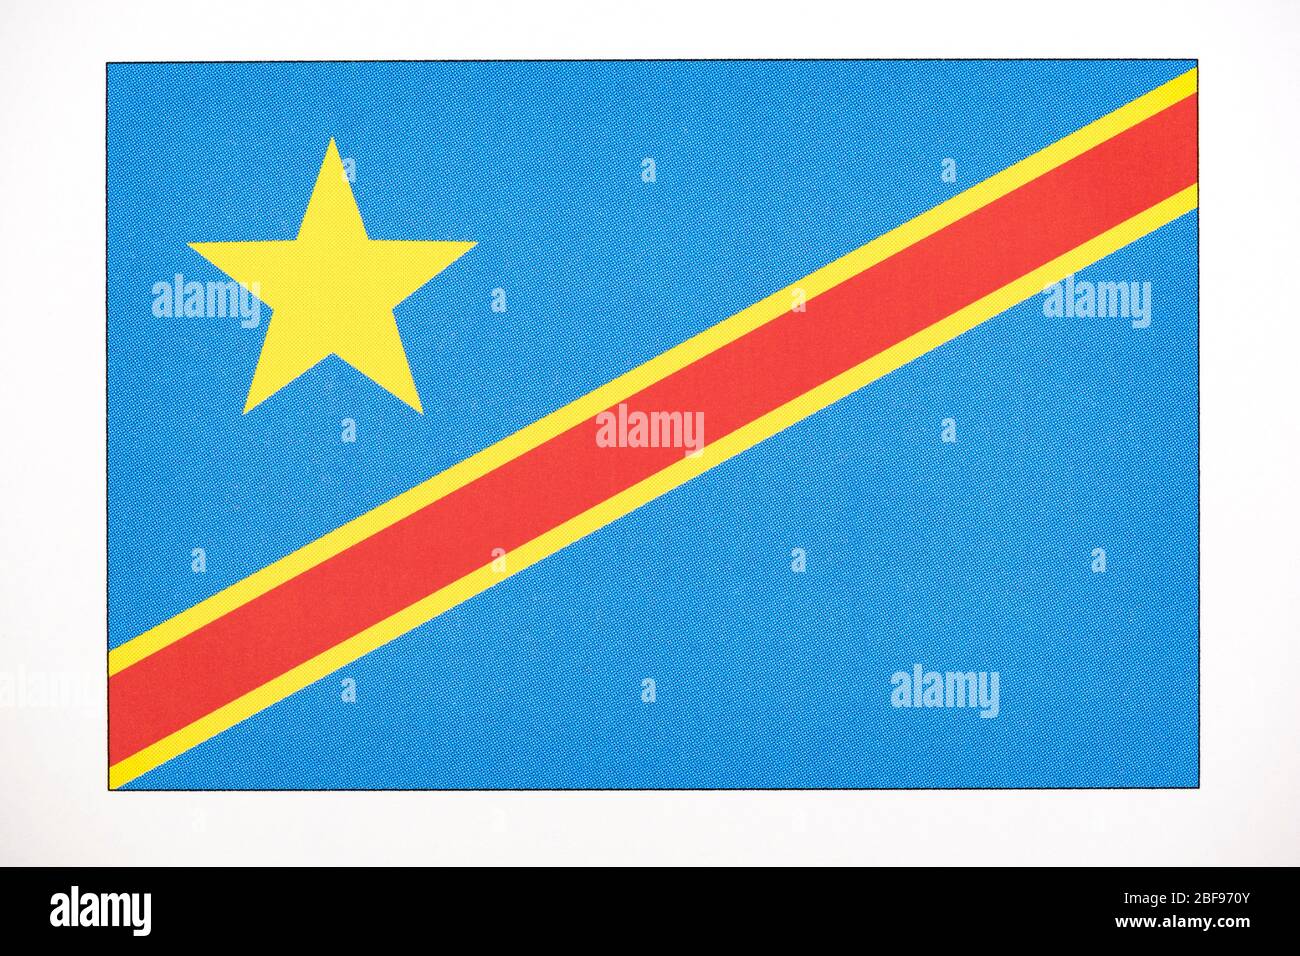 National flag of the Democratic Republic of the Congo. Stock Photo